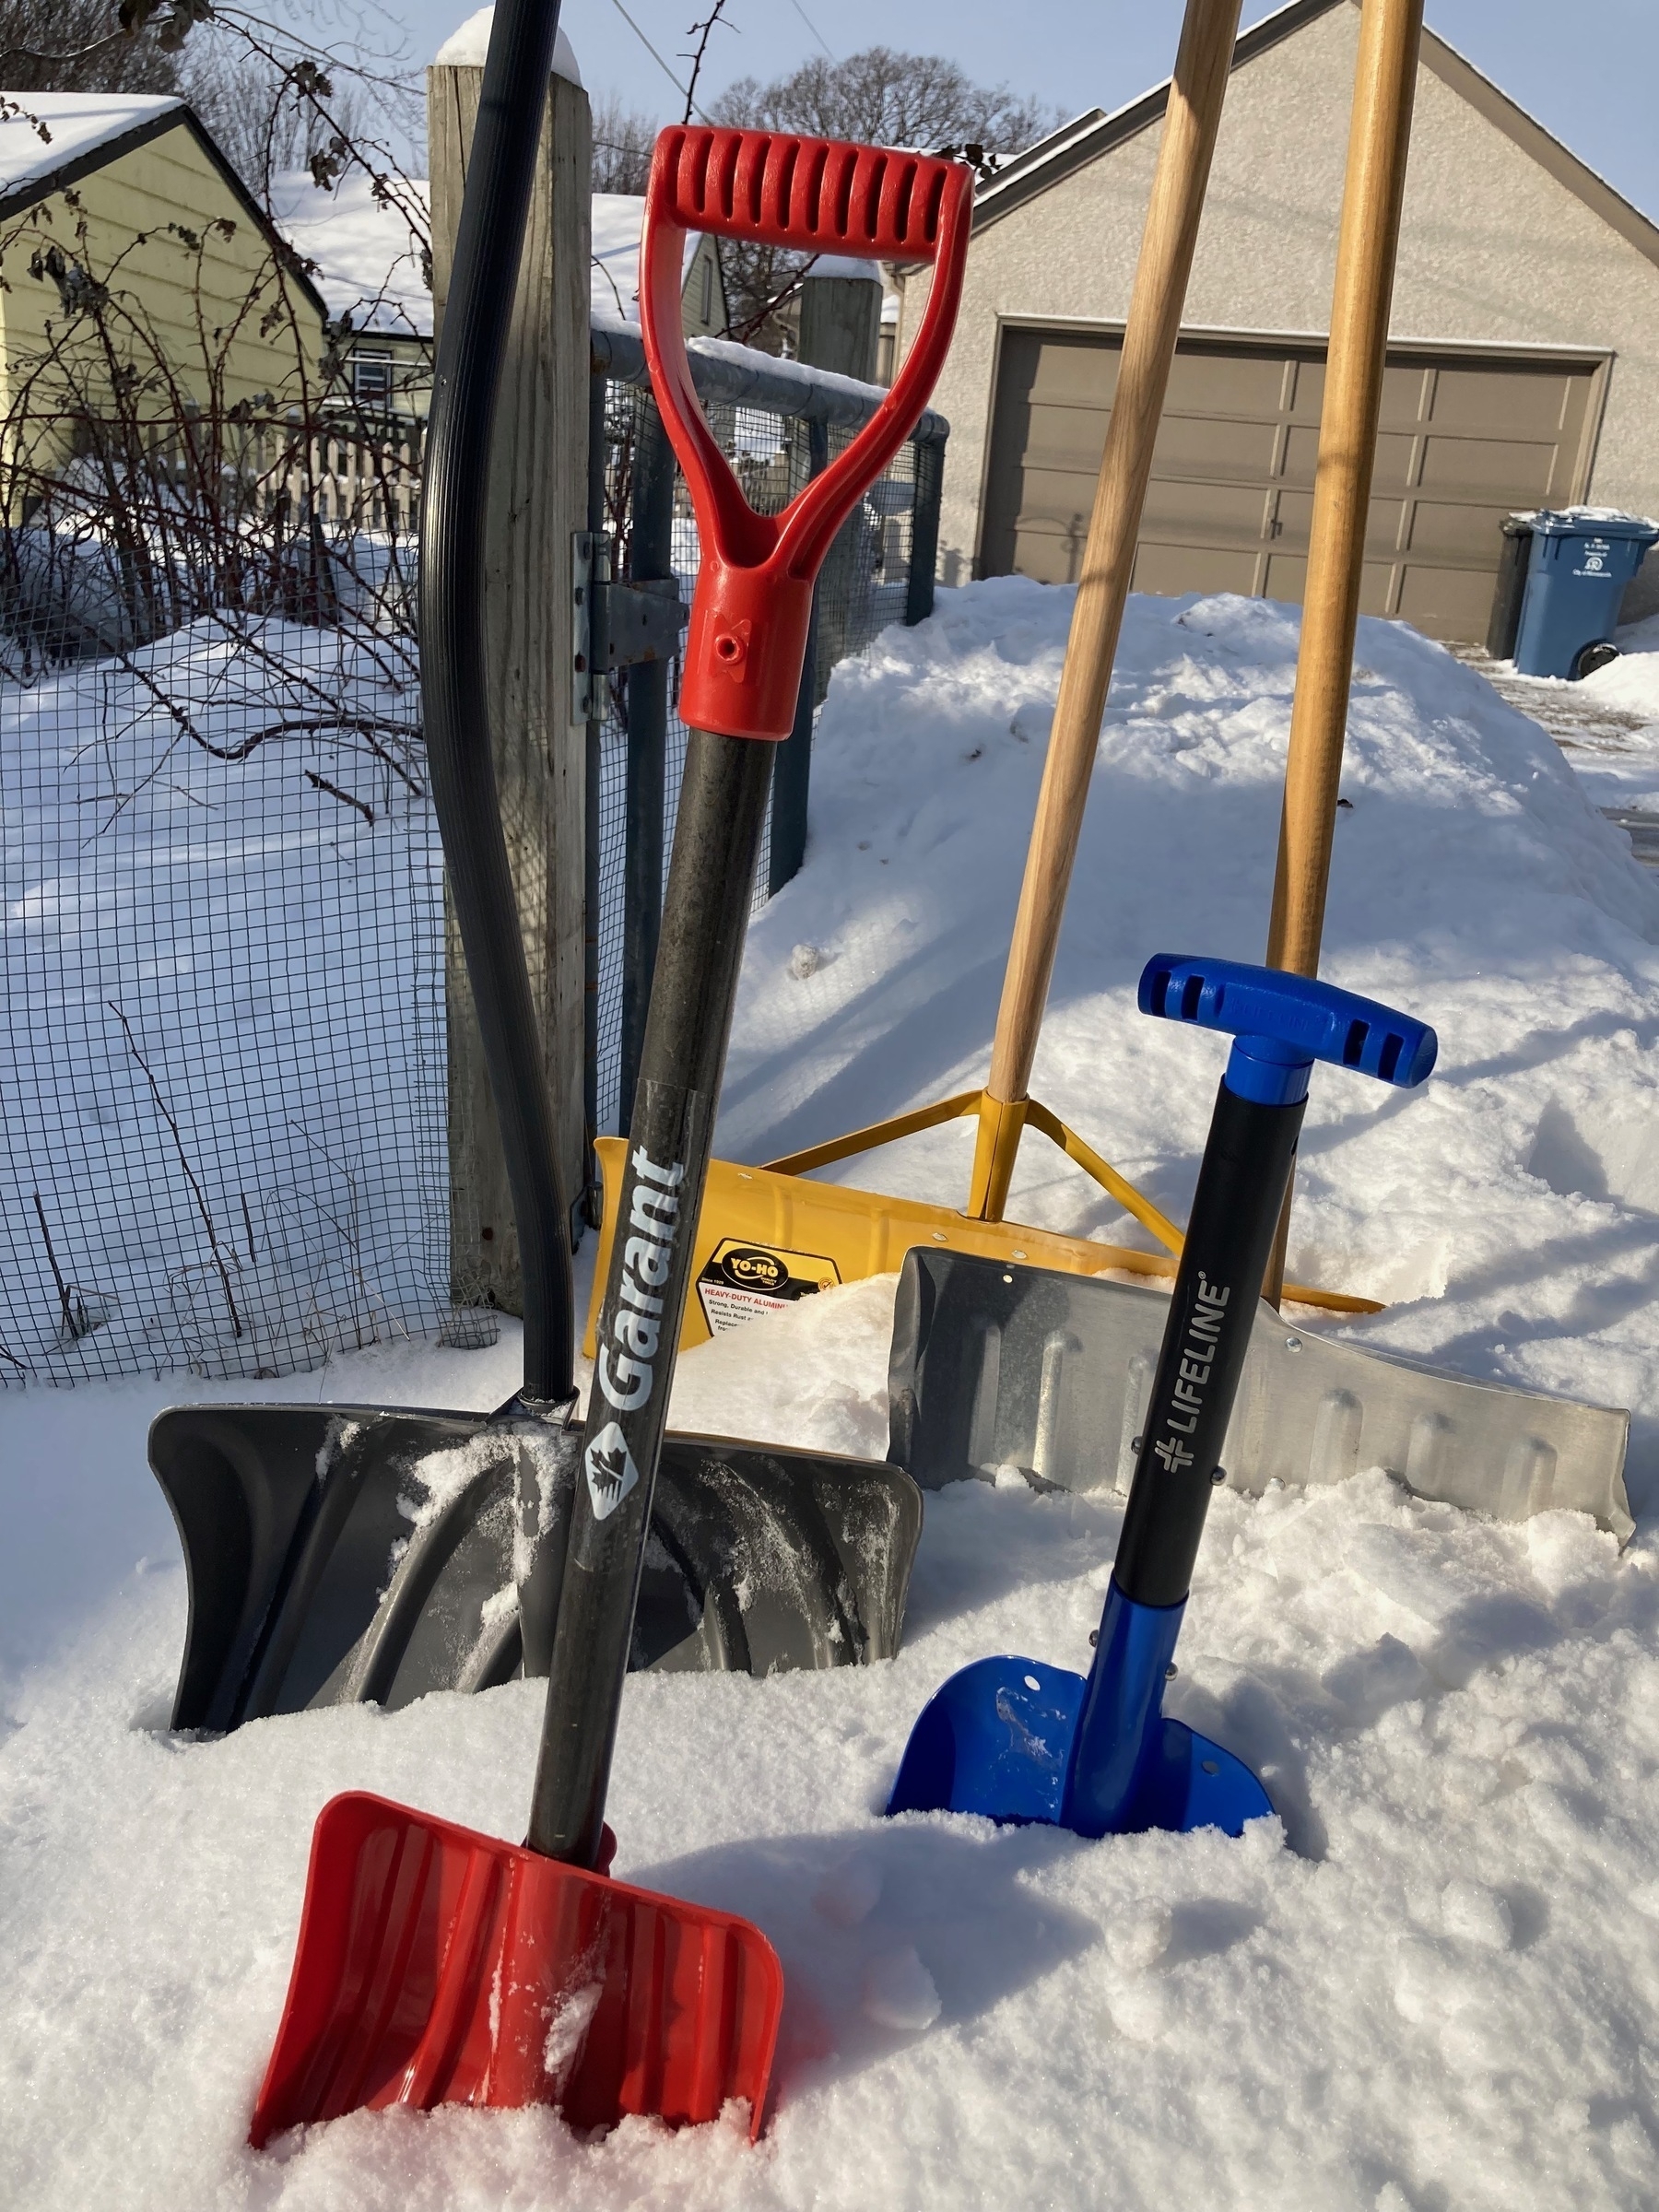 Five snow shovels in various colors and sizes